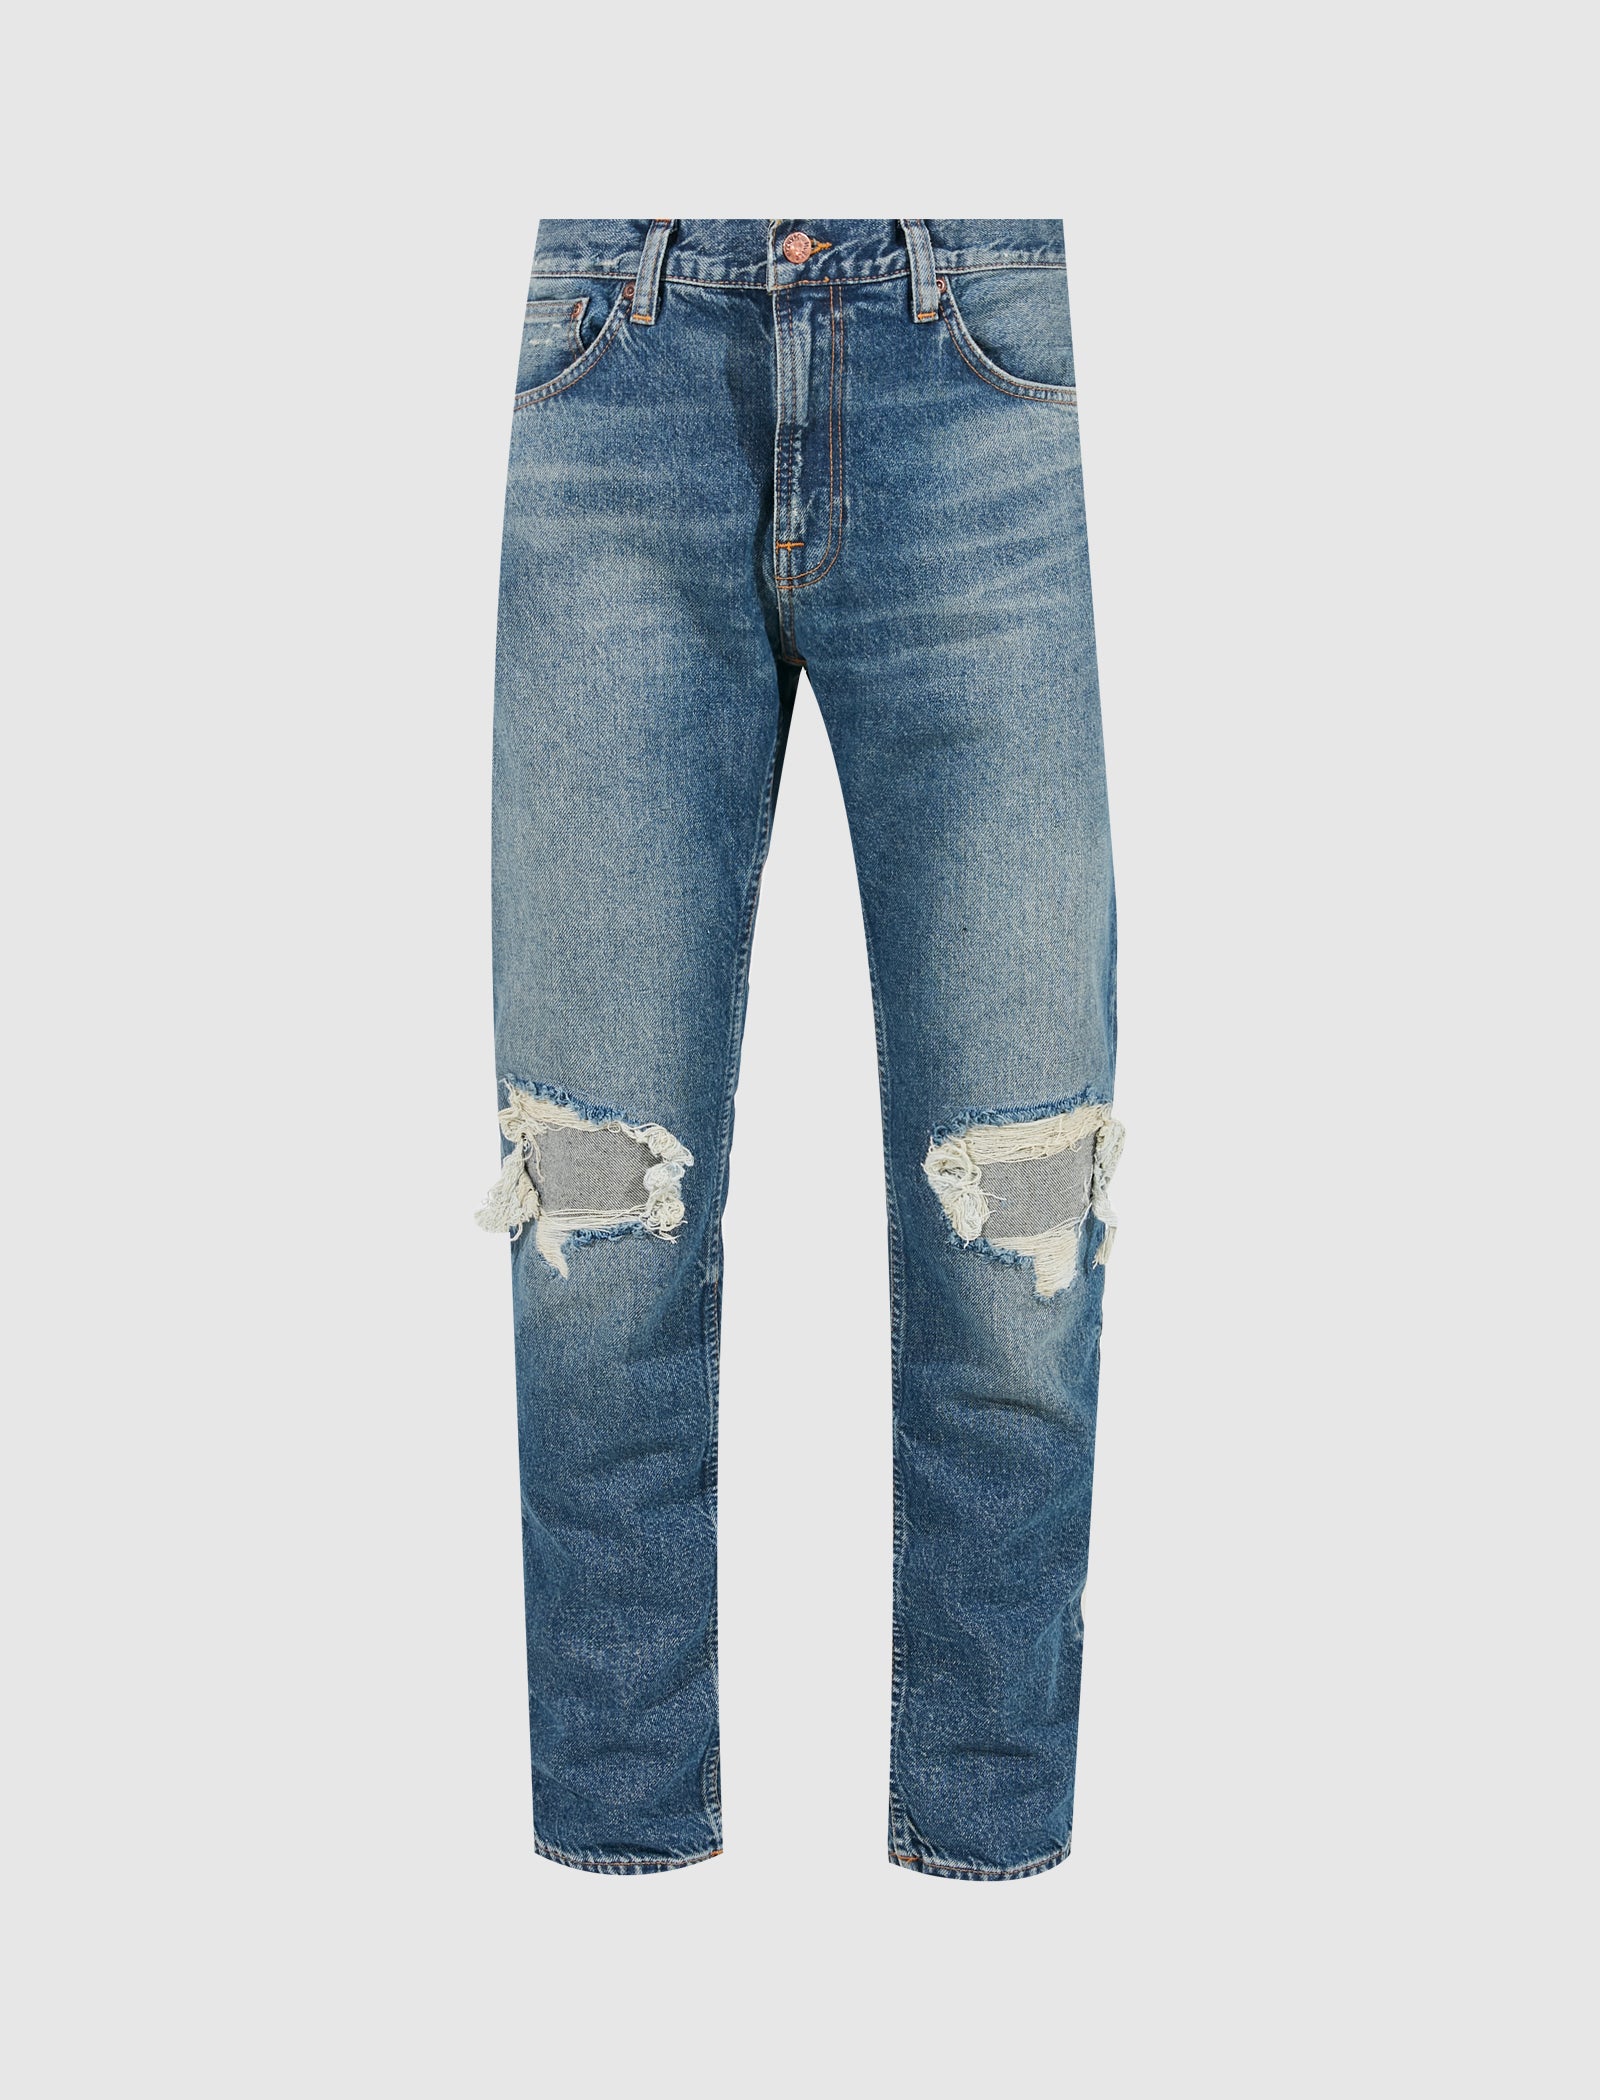 NUDIE JEANS CO. GRITTY JACKSON